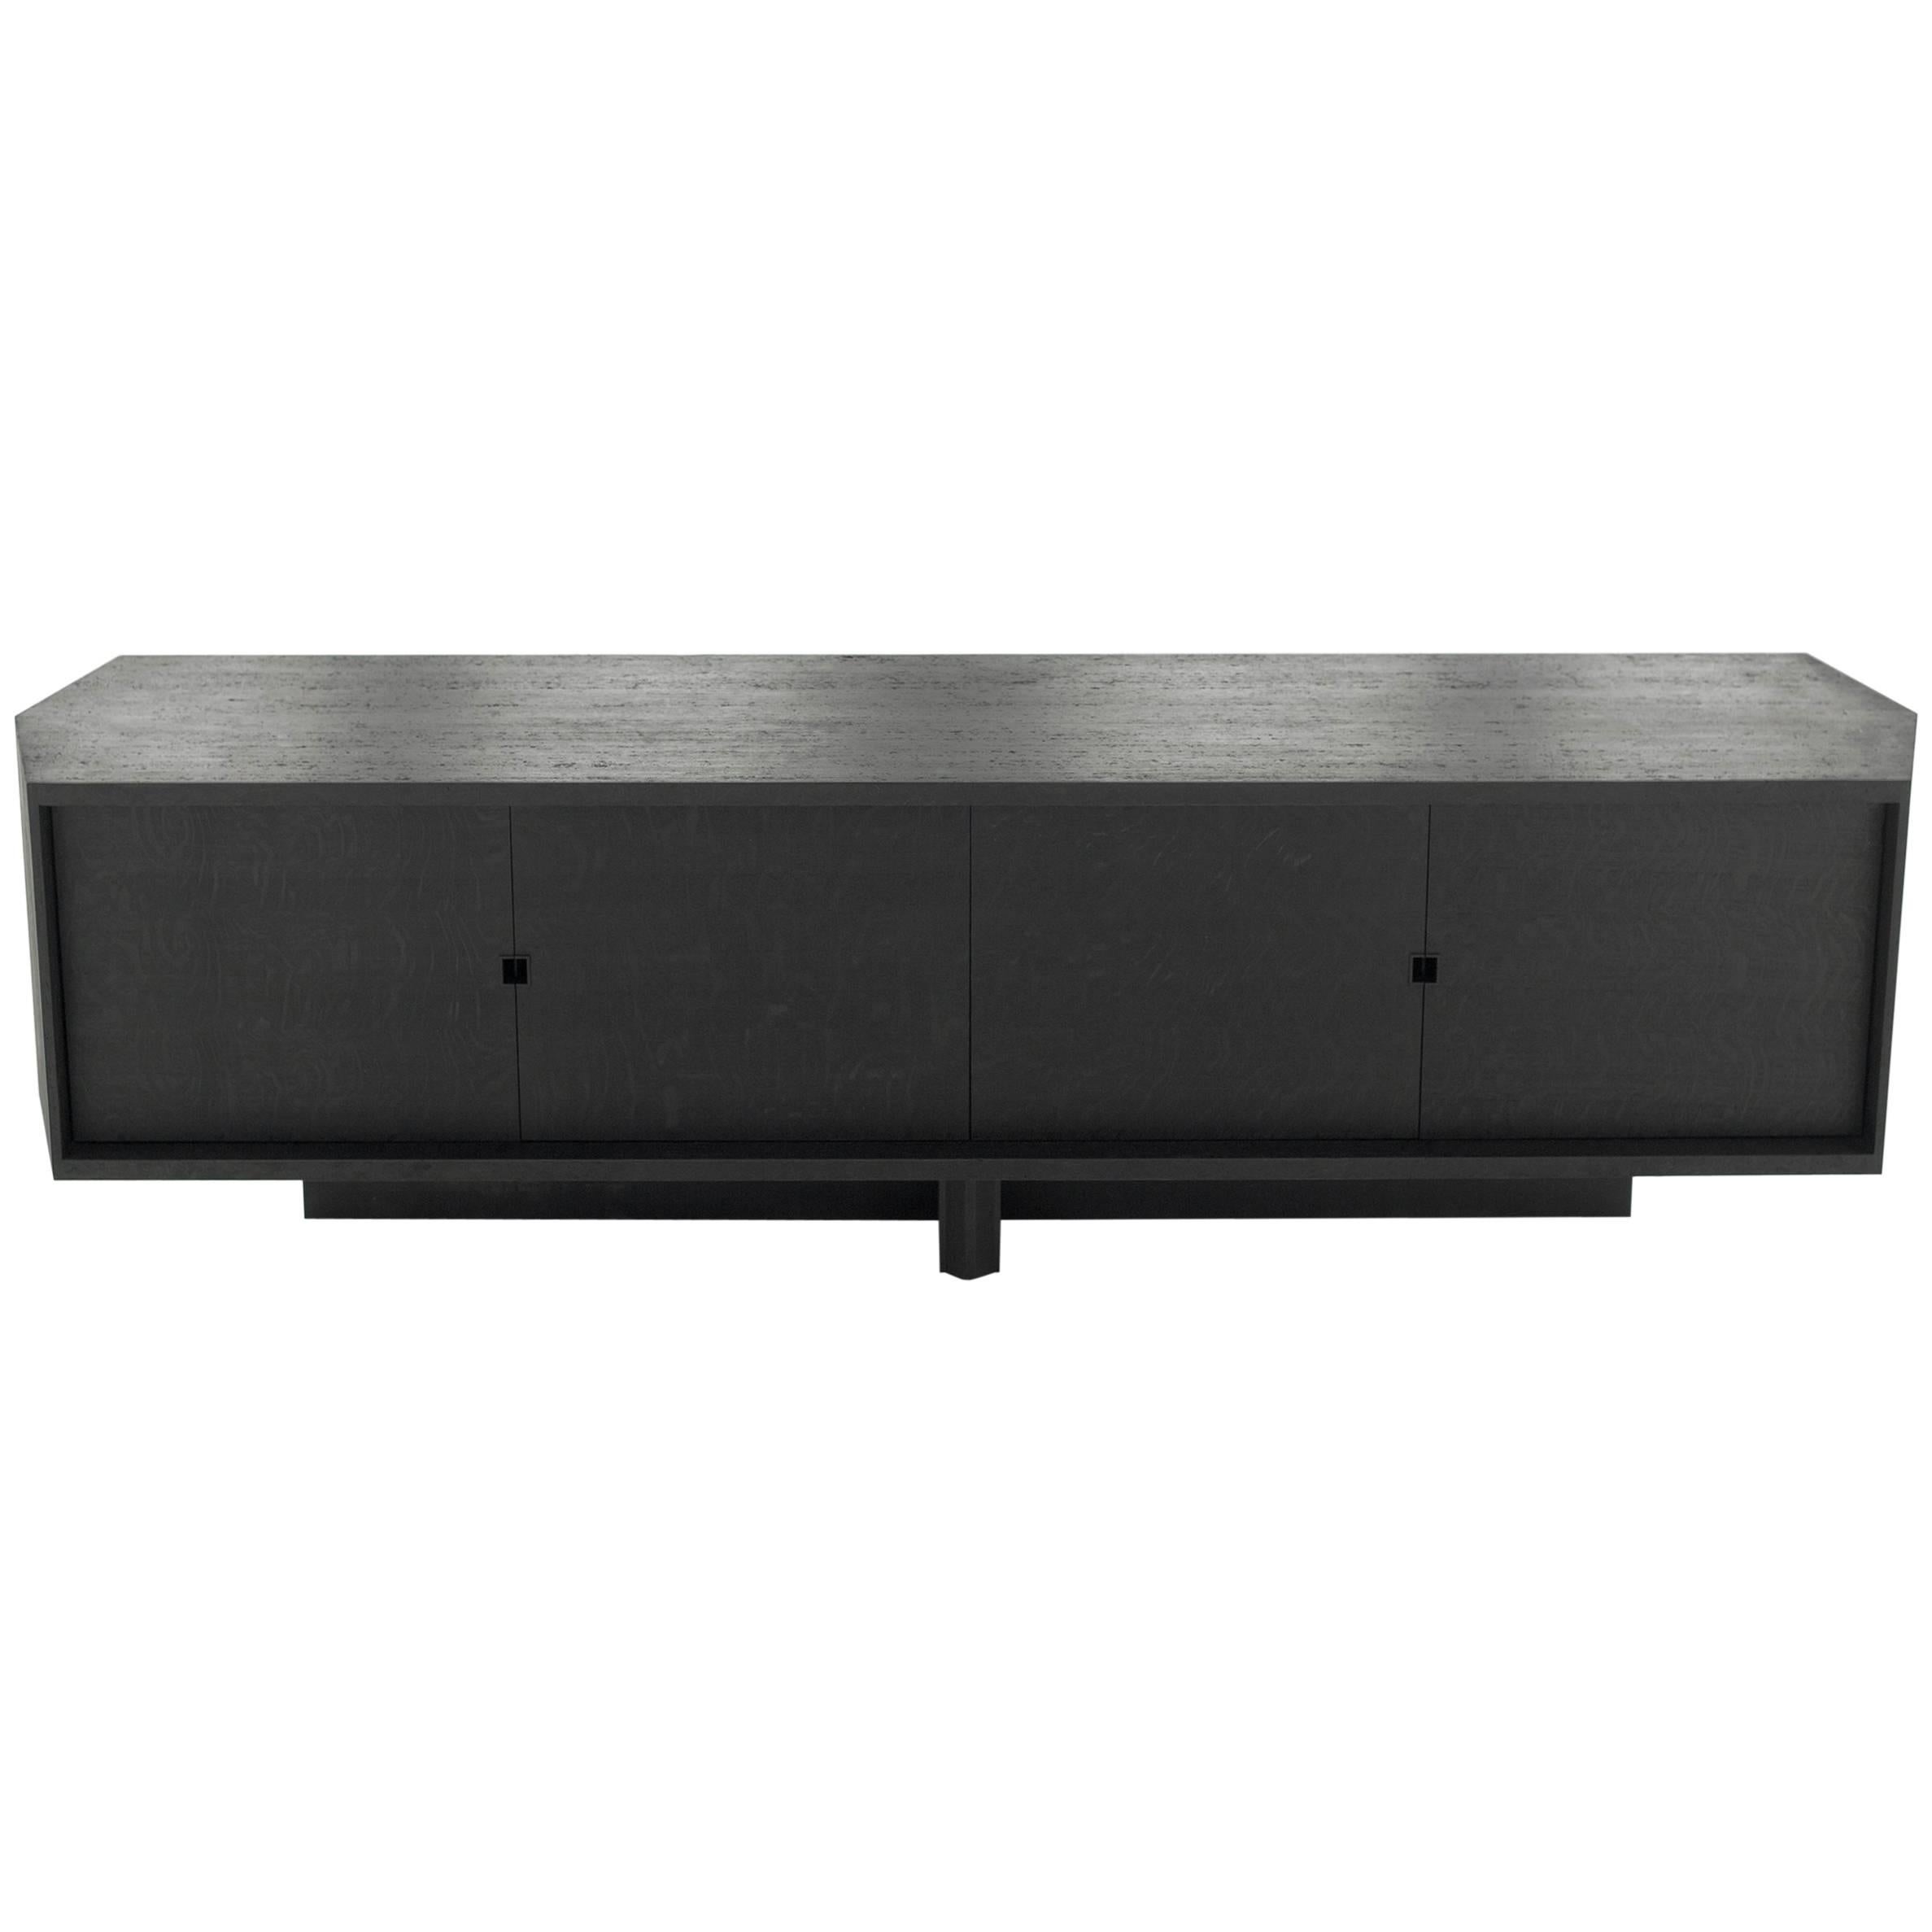 Blackened Struttura Credenza by May Furniture